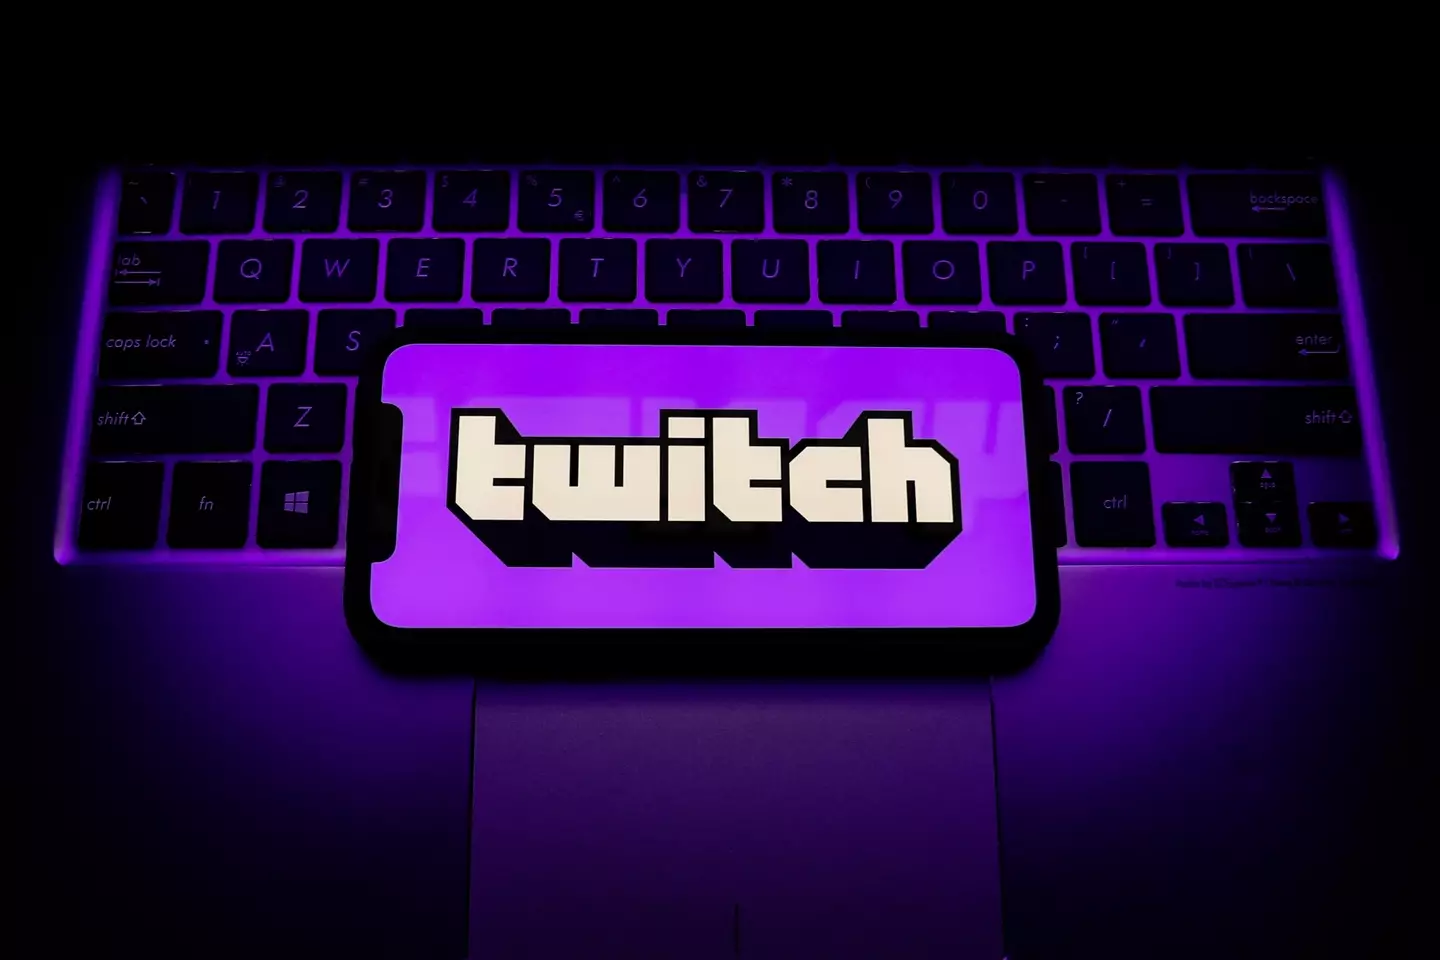 Twitch has apologized for the confusion around the update.